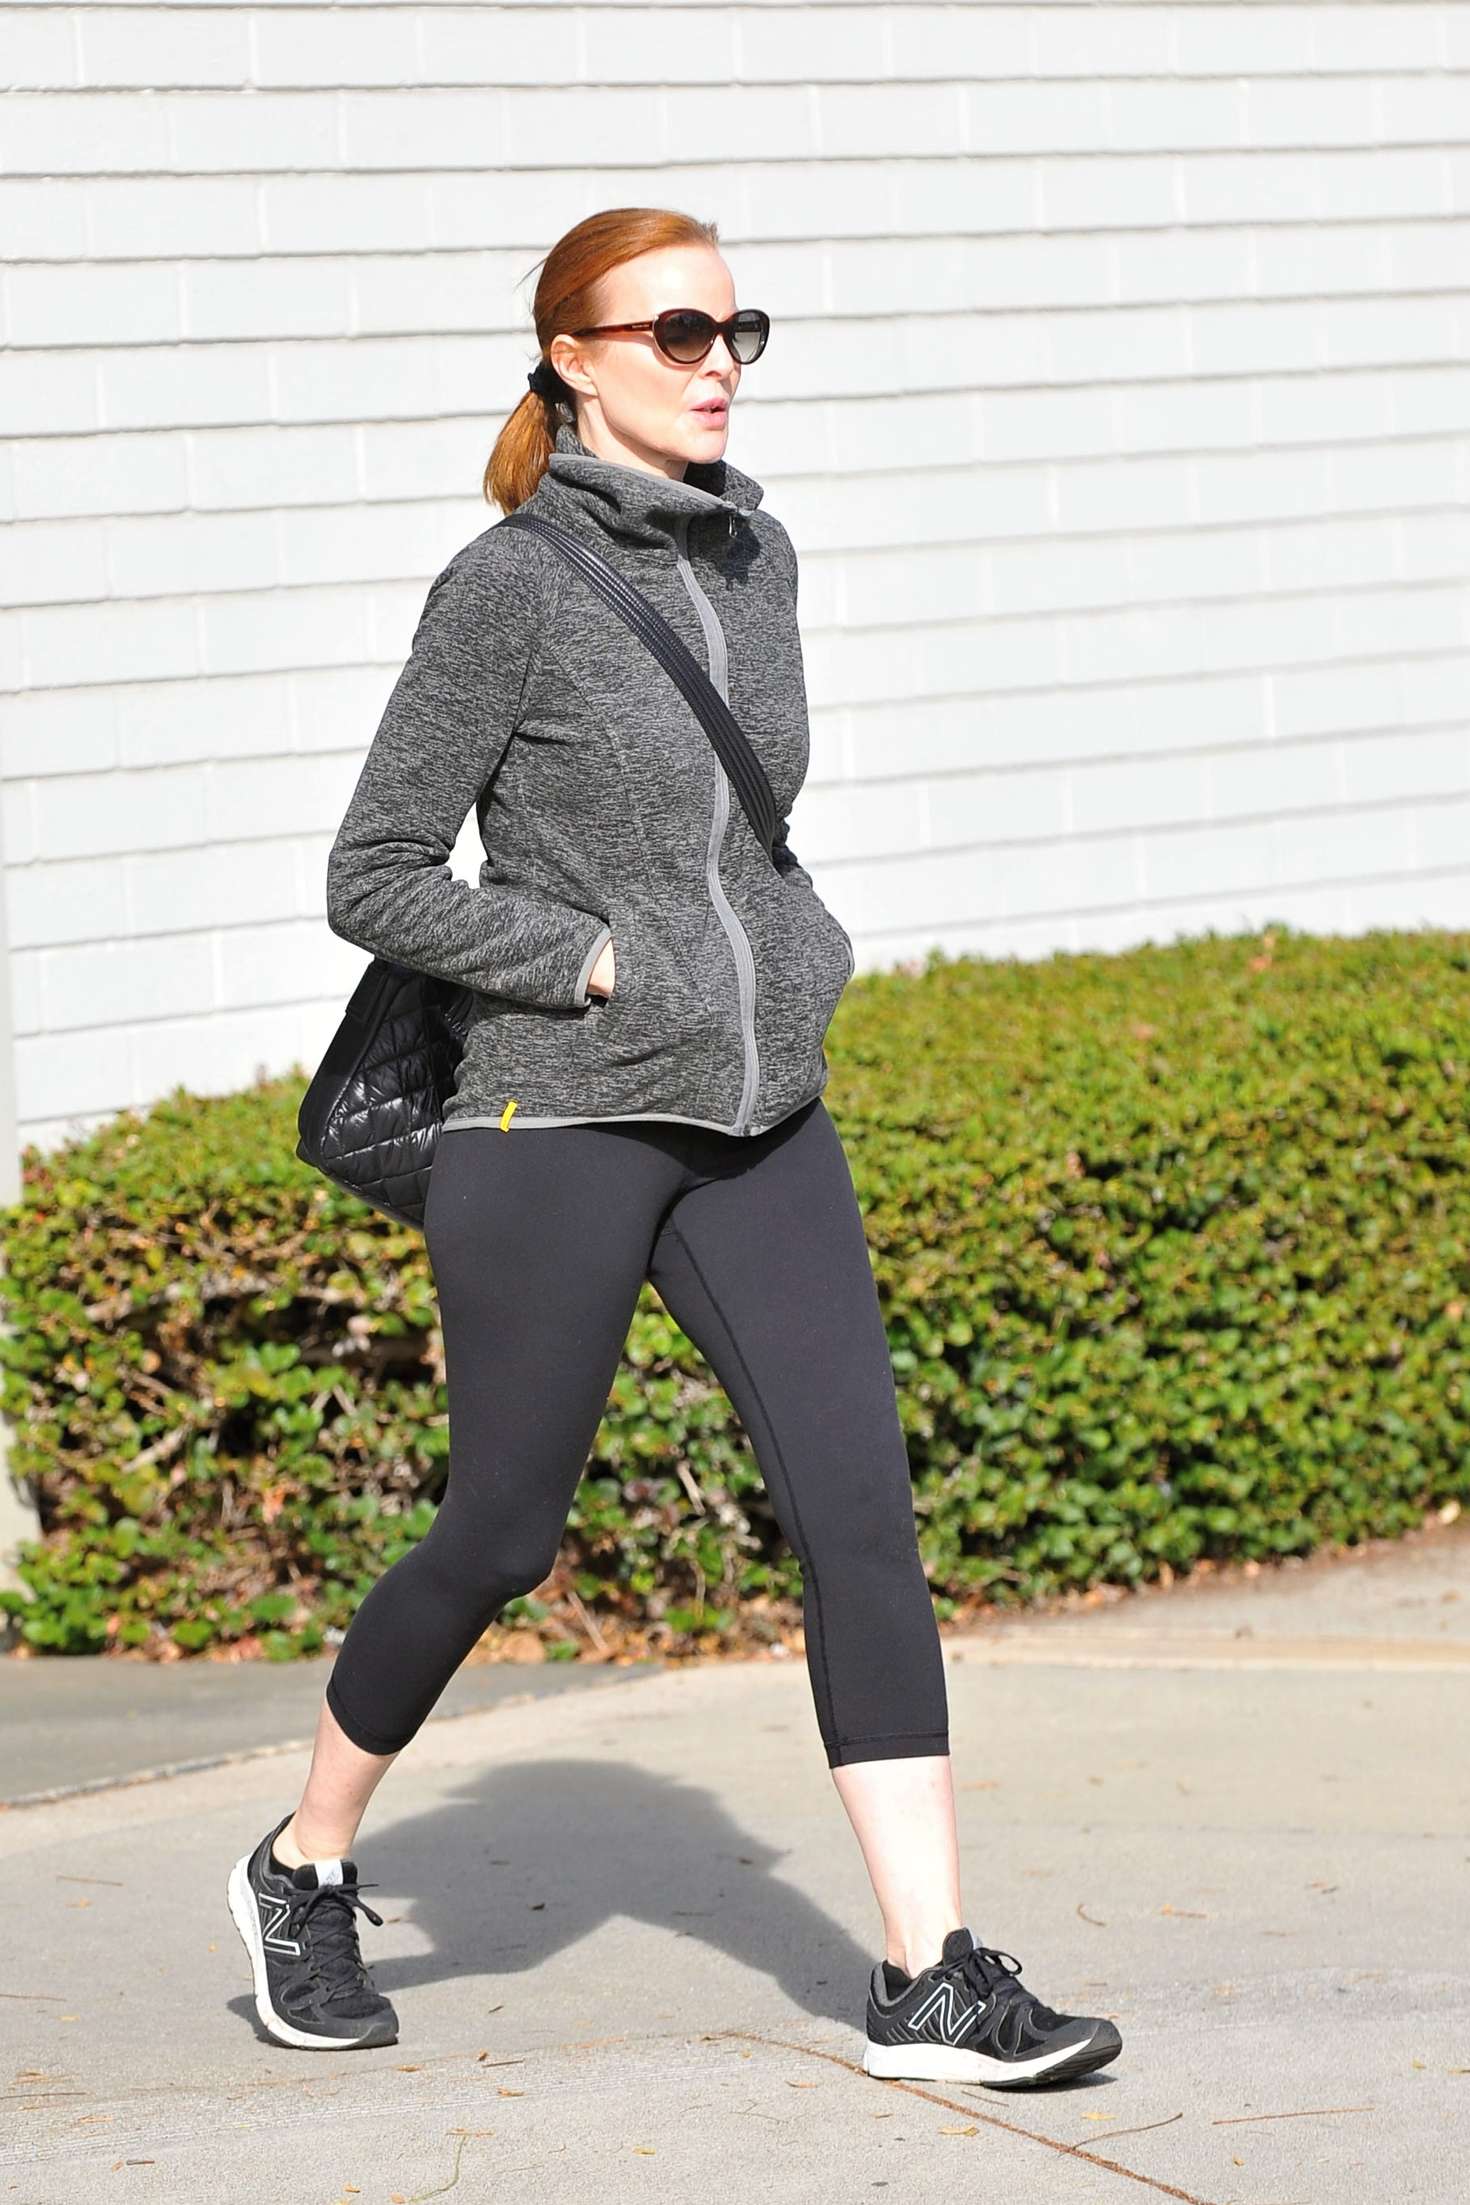 Marcia Cross in Tights going for a walk in Los Angeles